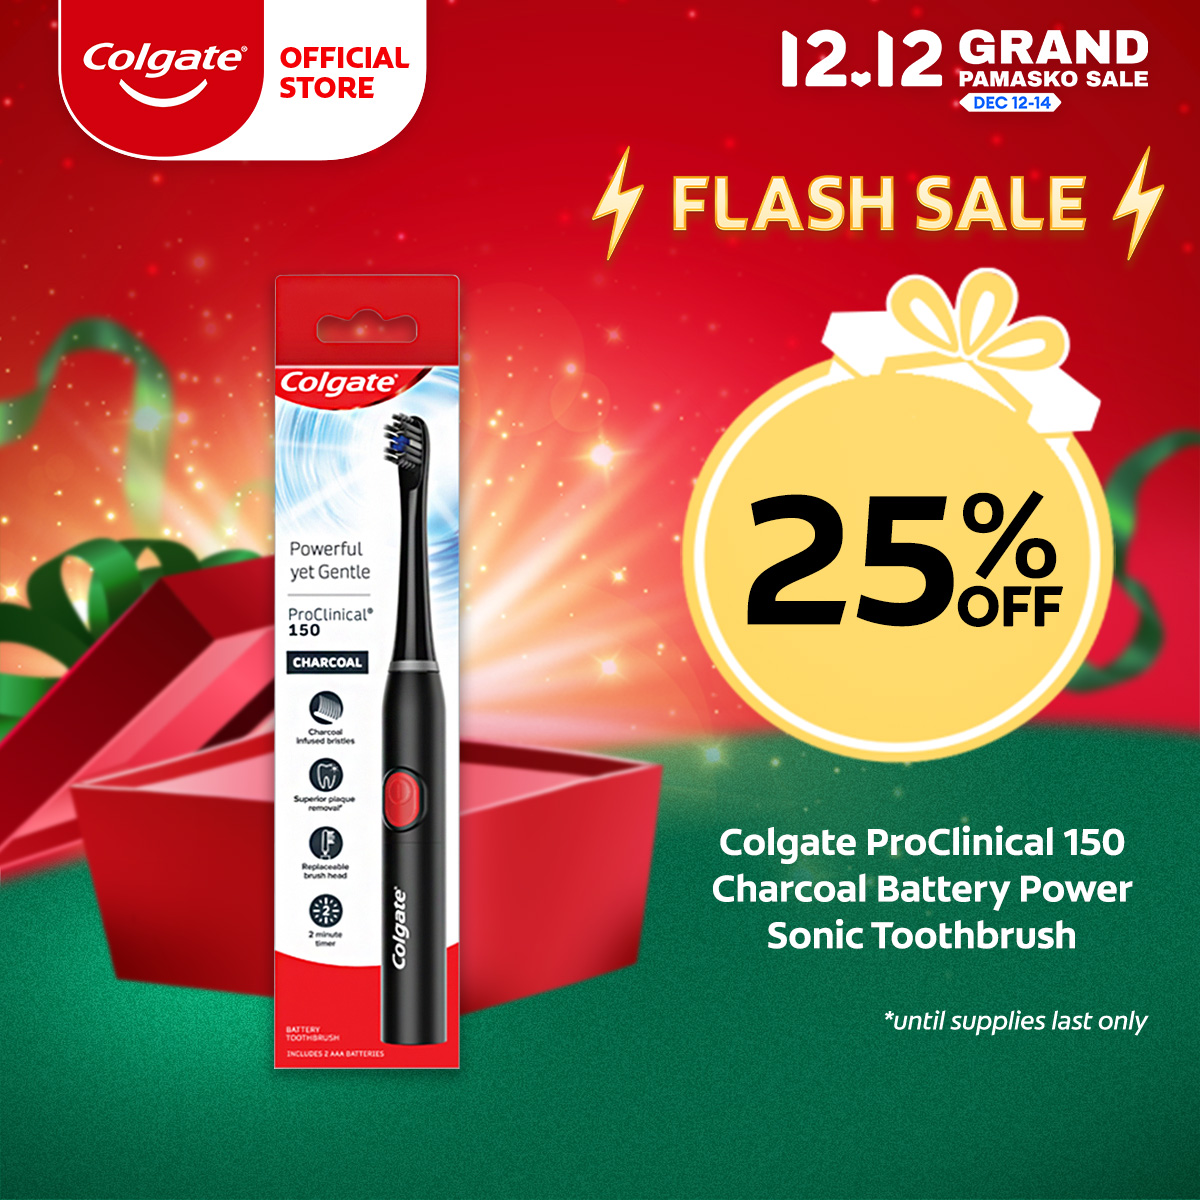 Lazada Philippines - Colgate ProClinical 150 Charcoal Battery Power Sonic Toothbrush with Soft Bristles